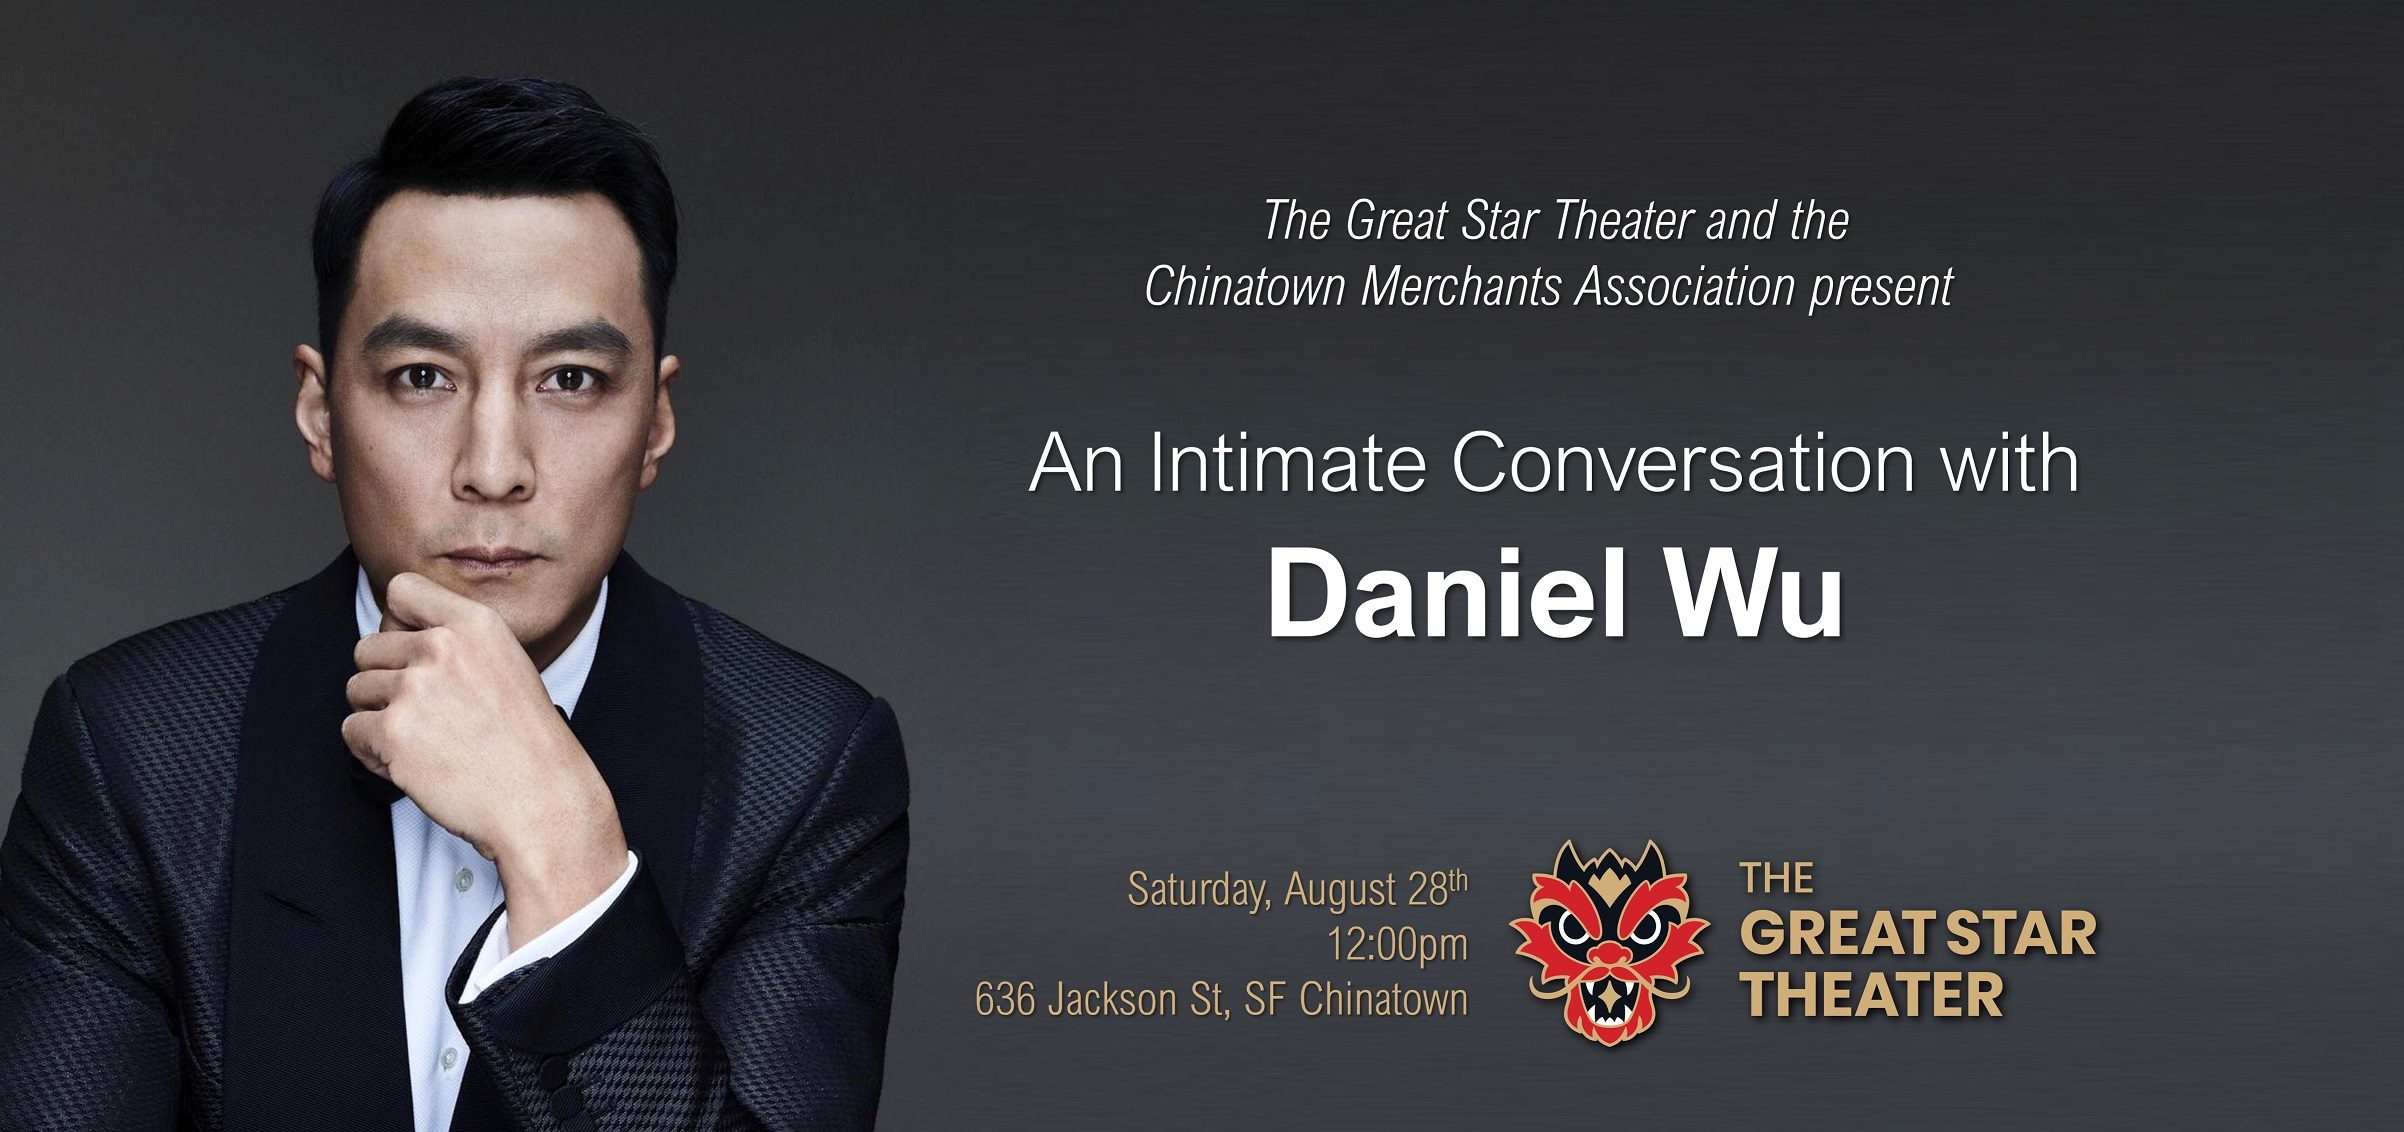 An Intimate Conversation with Daniel Wu